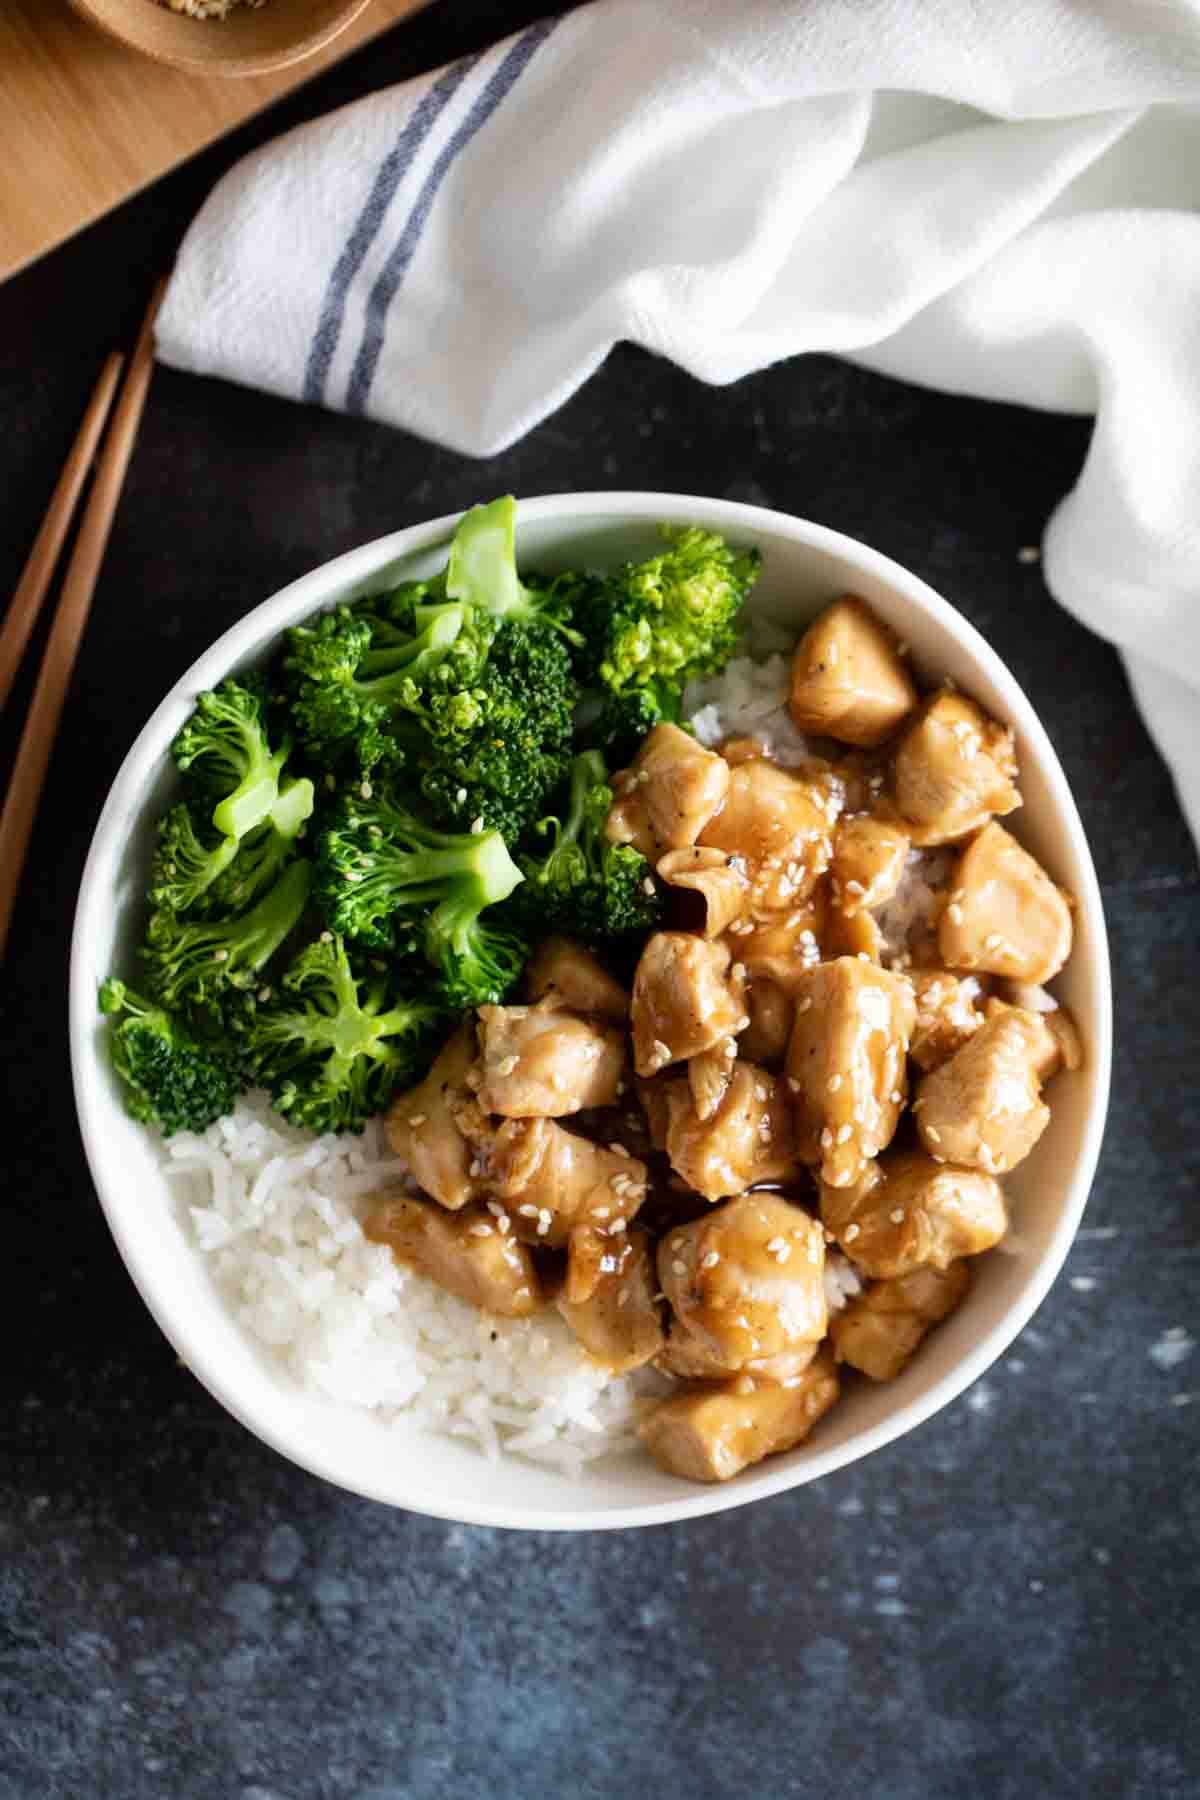 rice, steamed broccoli, and teriyaki chicken in a bowl